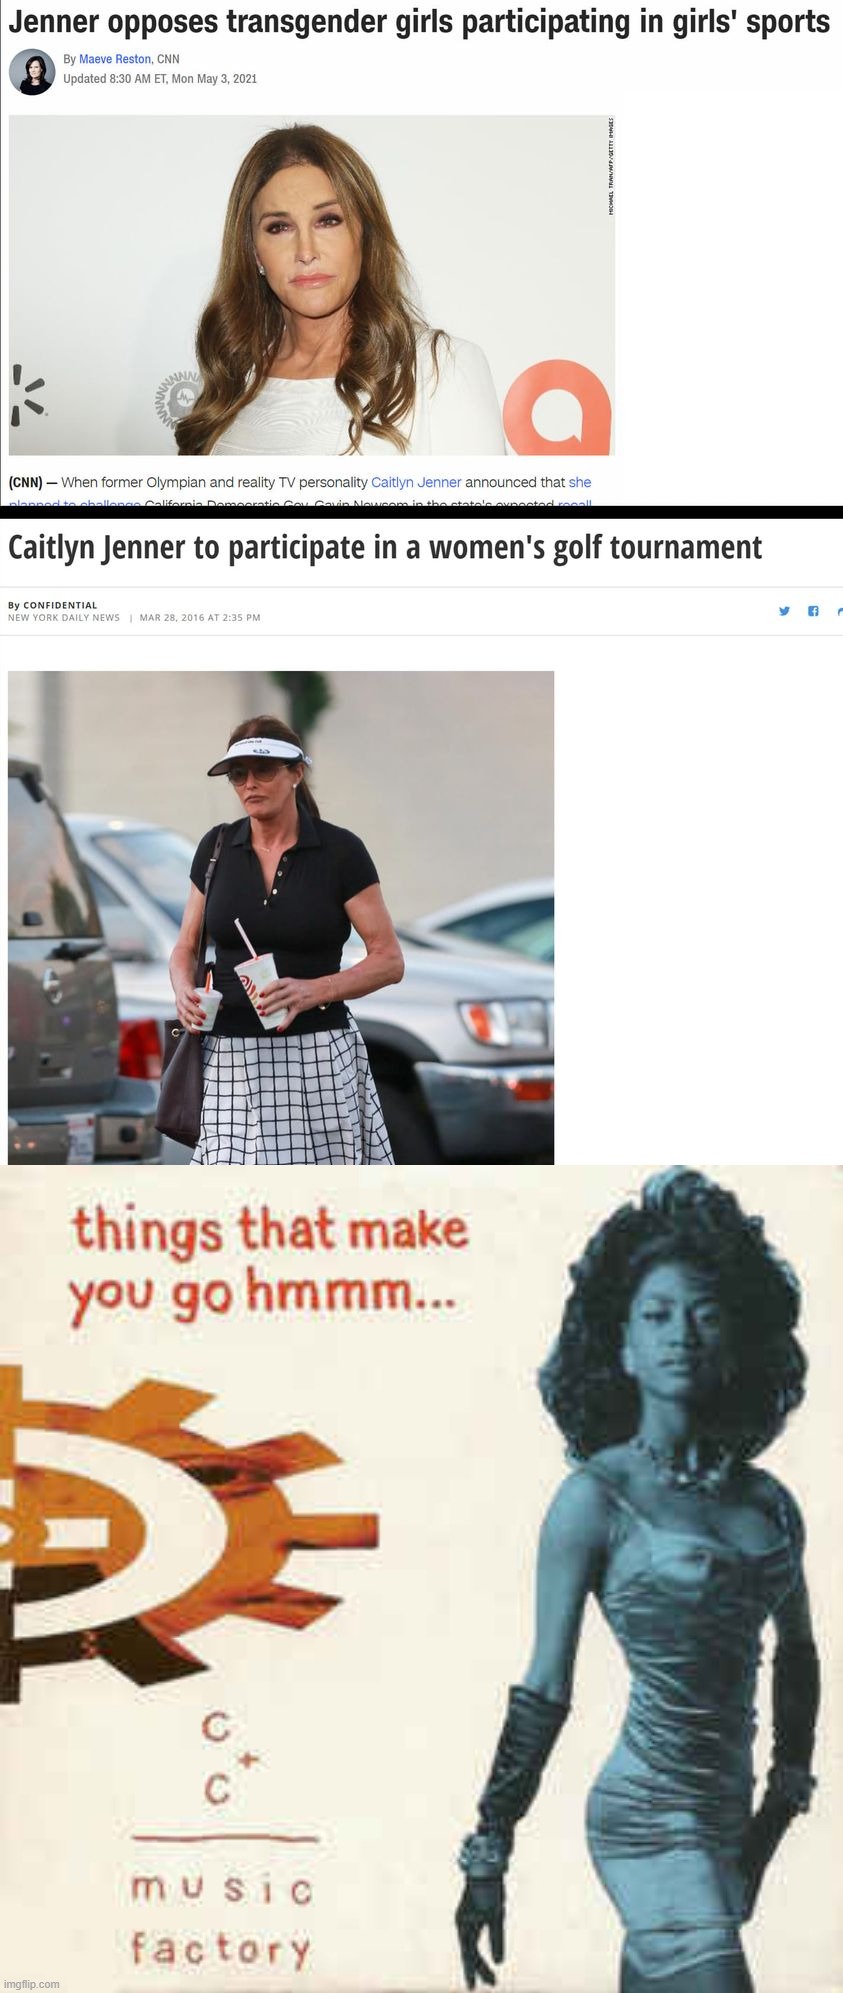 things that make you go hmmm | image tagged in caitlyn jenner hypocrite,things that make you go hmmm,caitlyn jenner,conservative hypocrisy,gop hypocrite,transgender | made w/ Imgflip meme maker